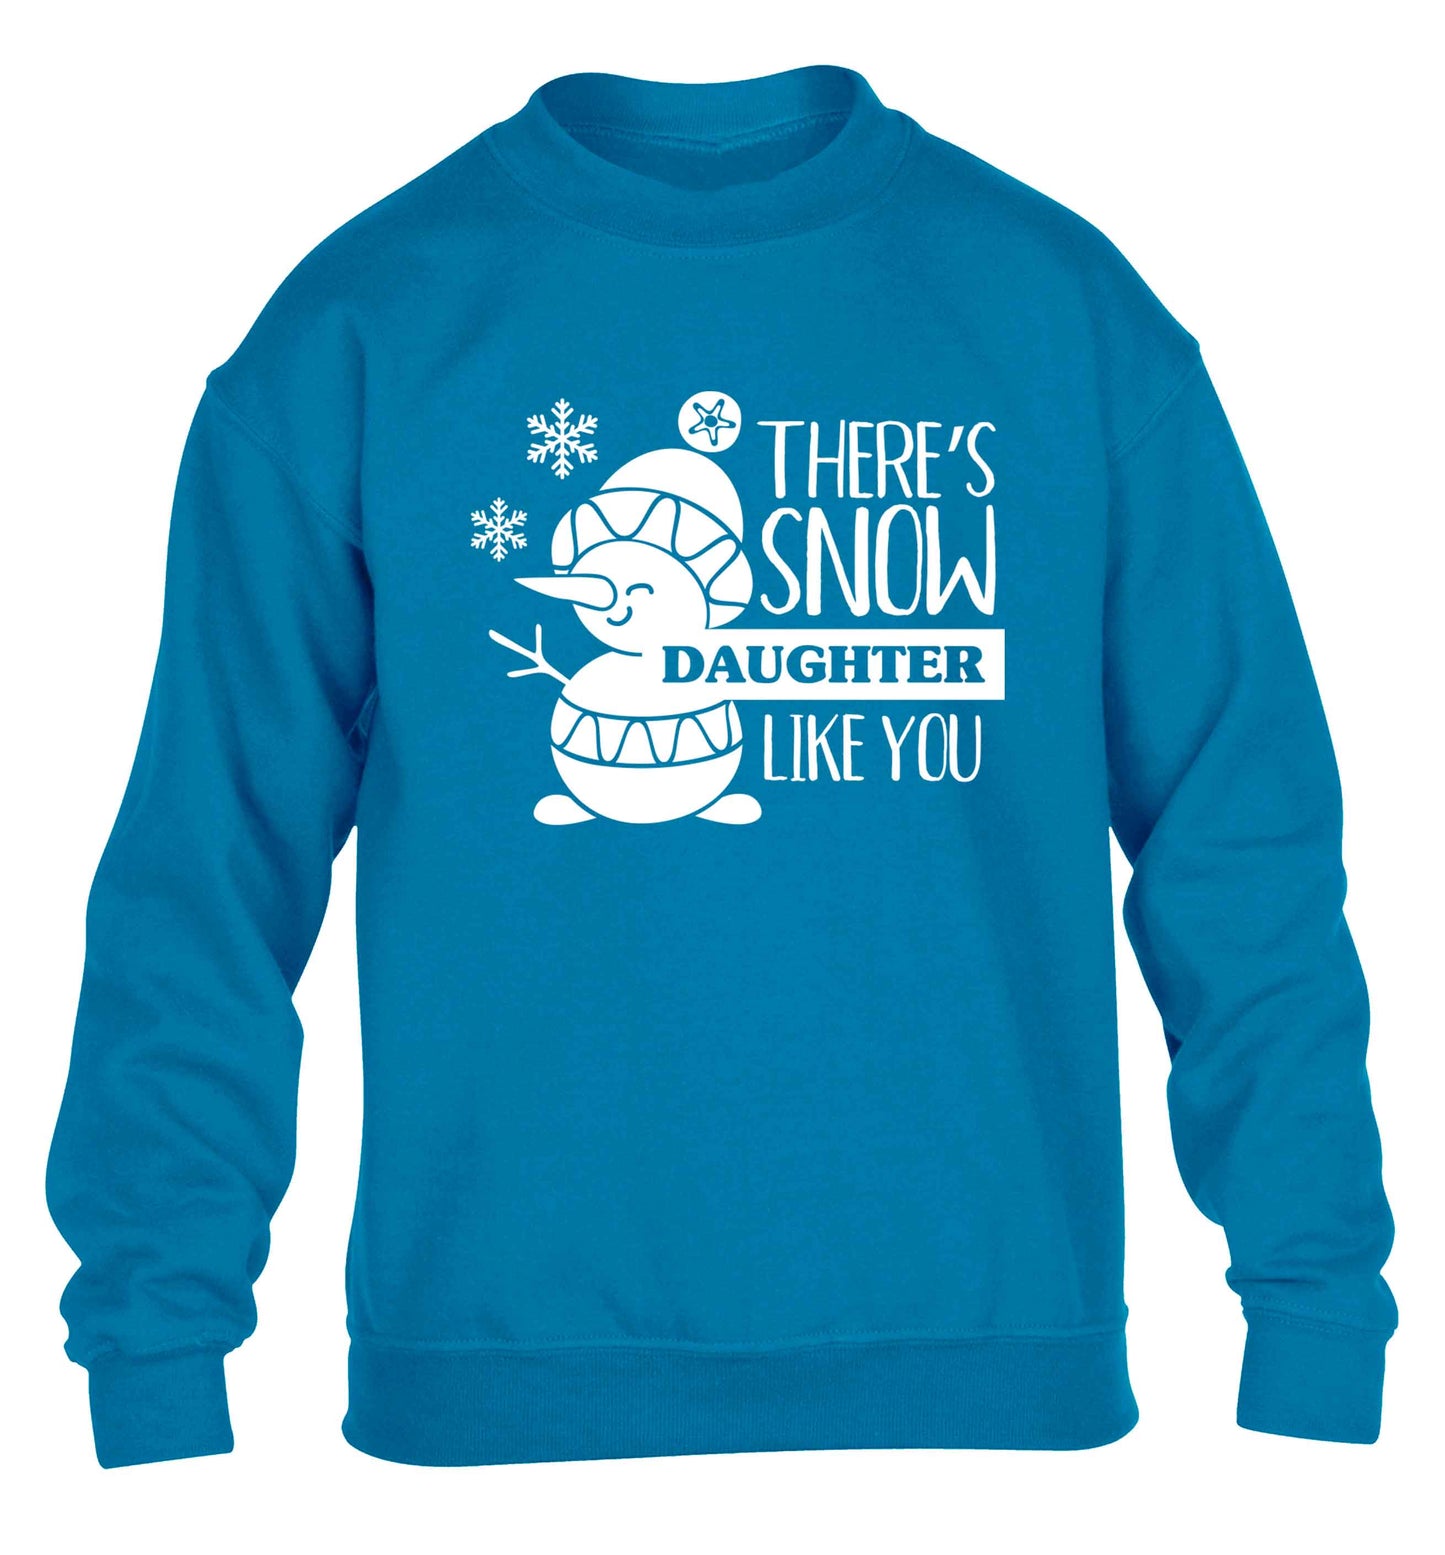 There's snow daughter like you children's blue sweater 12-13 Years